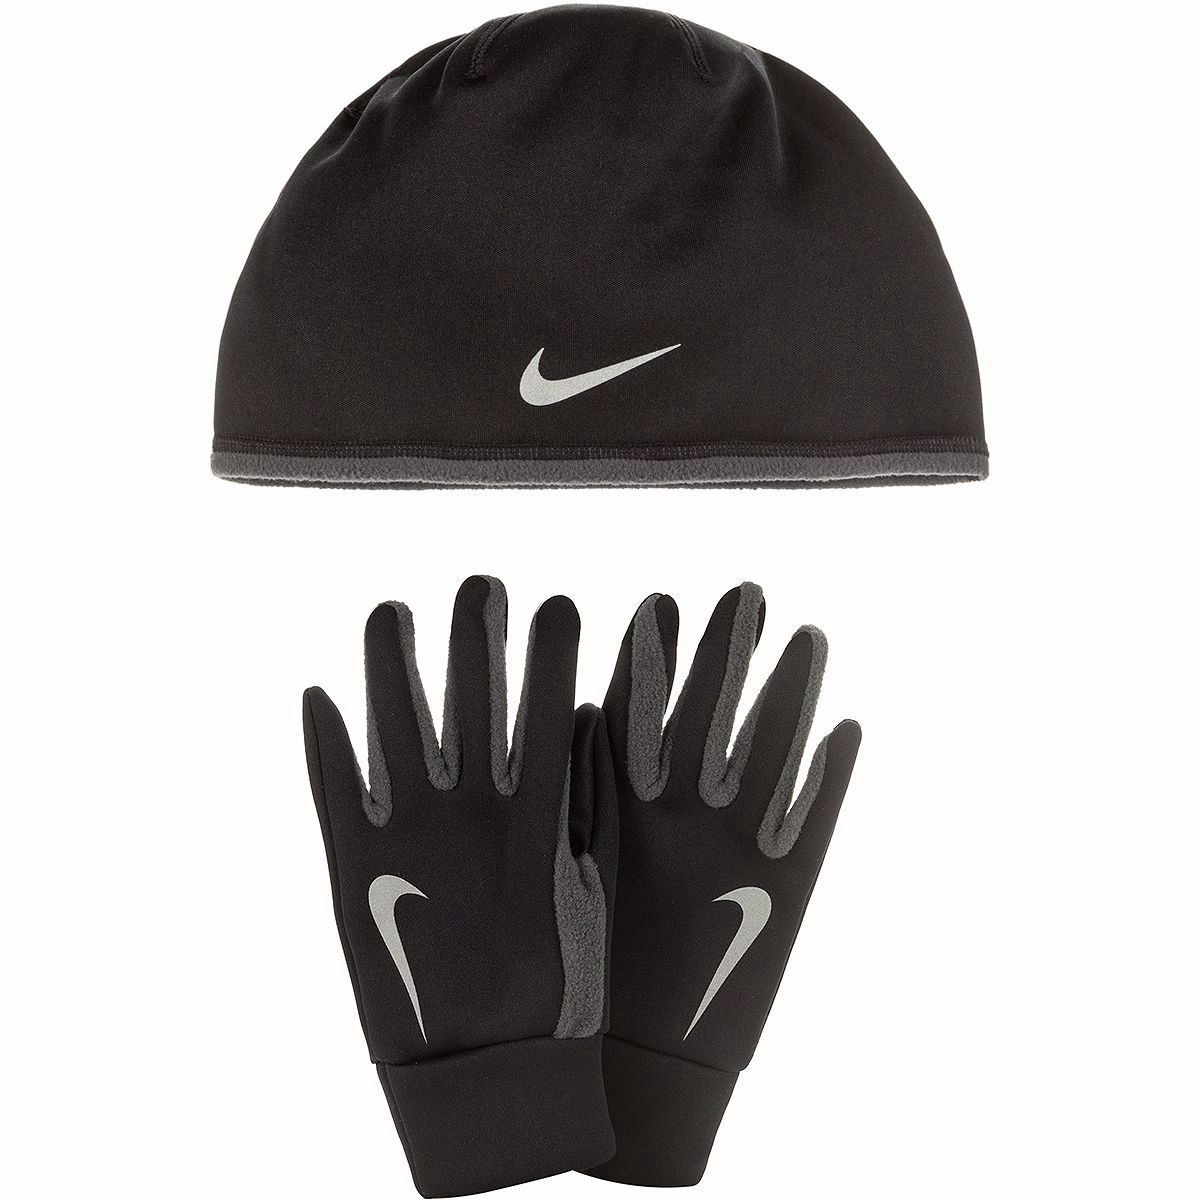 nike gloves and hat set